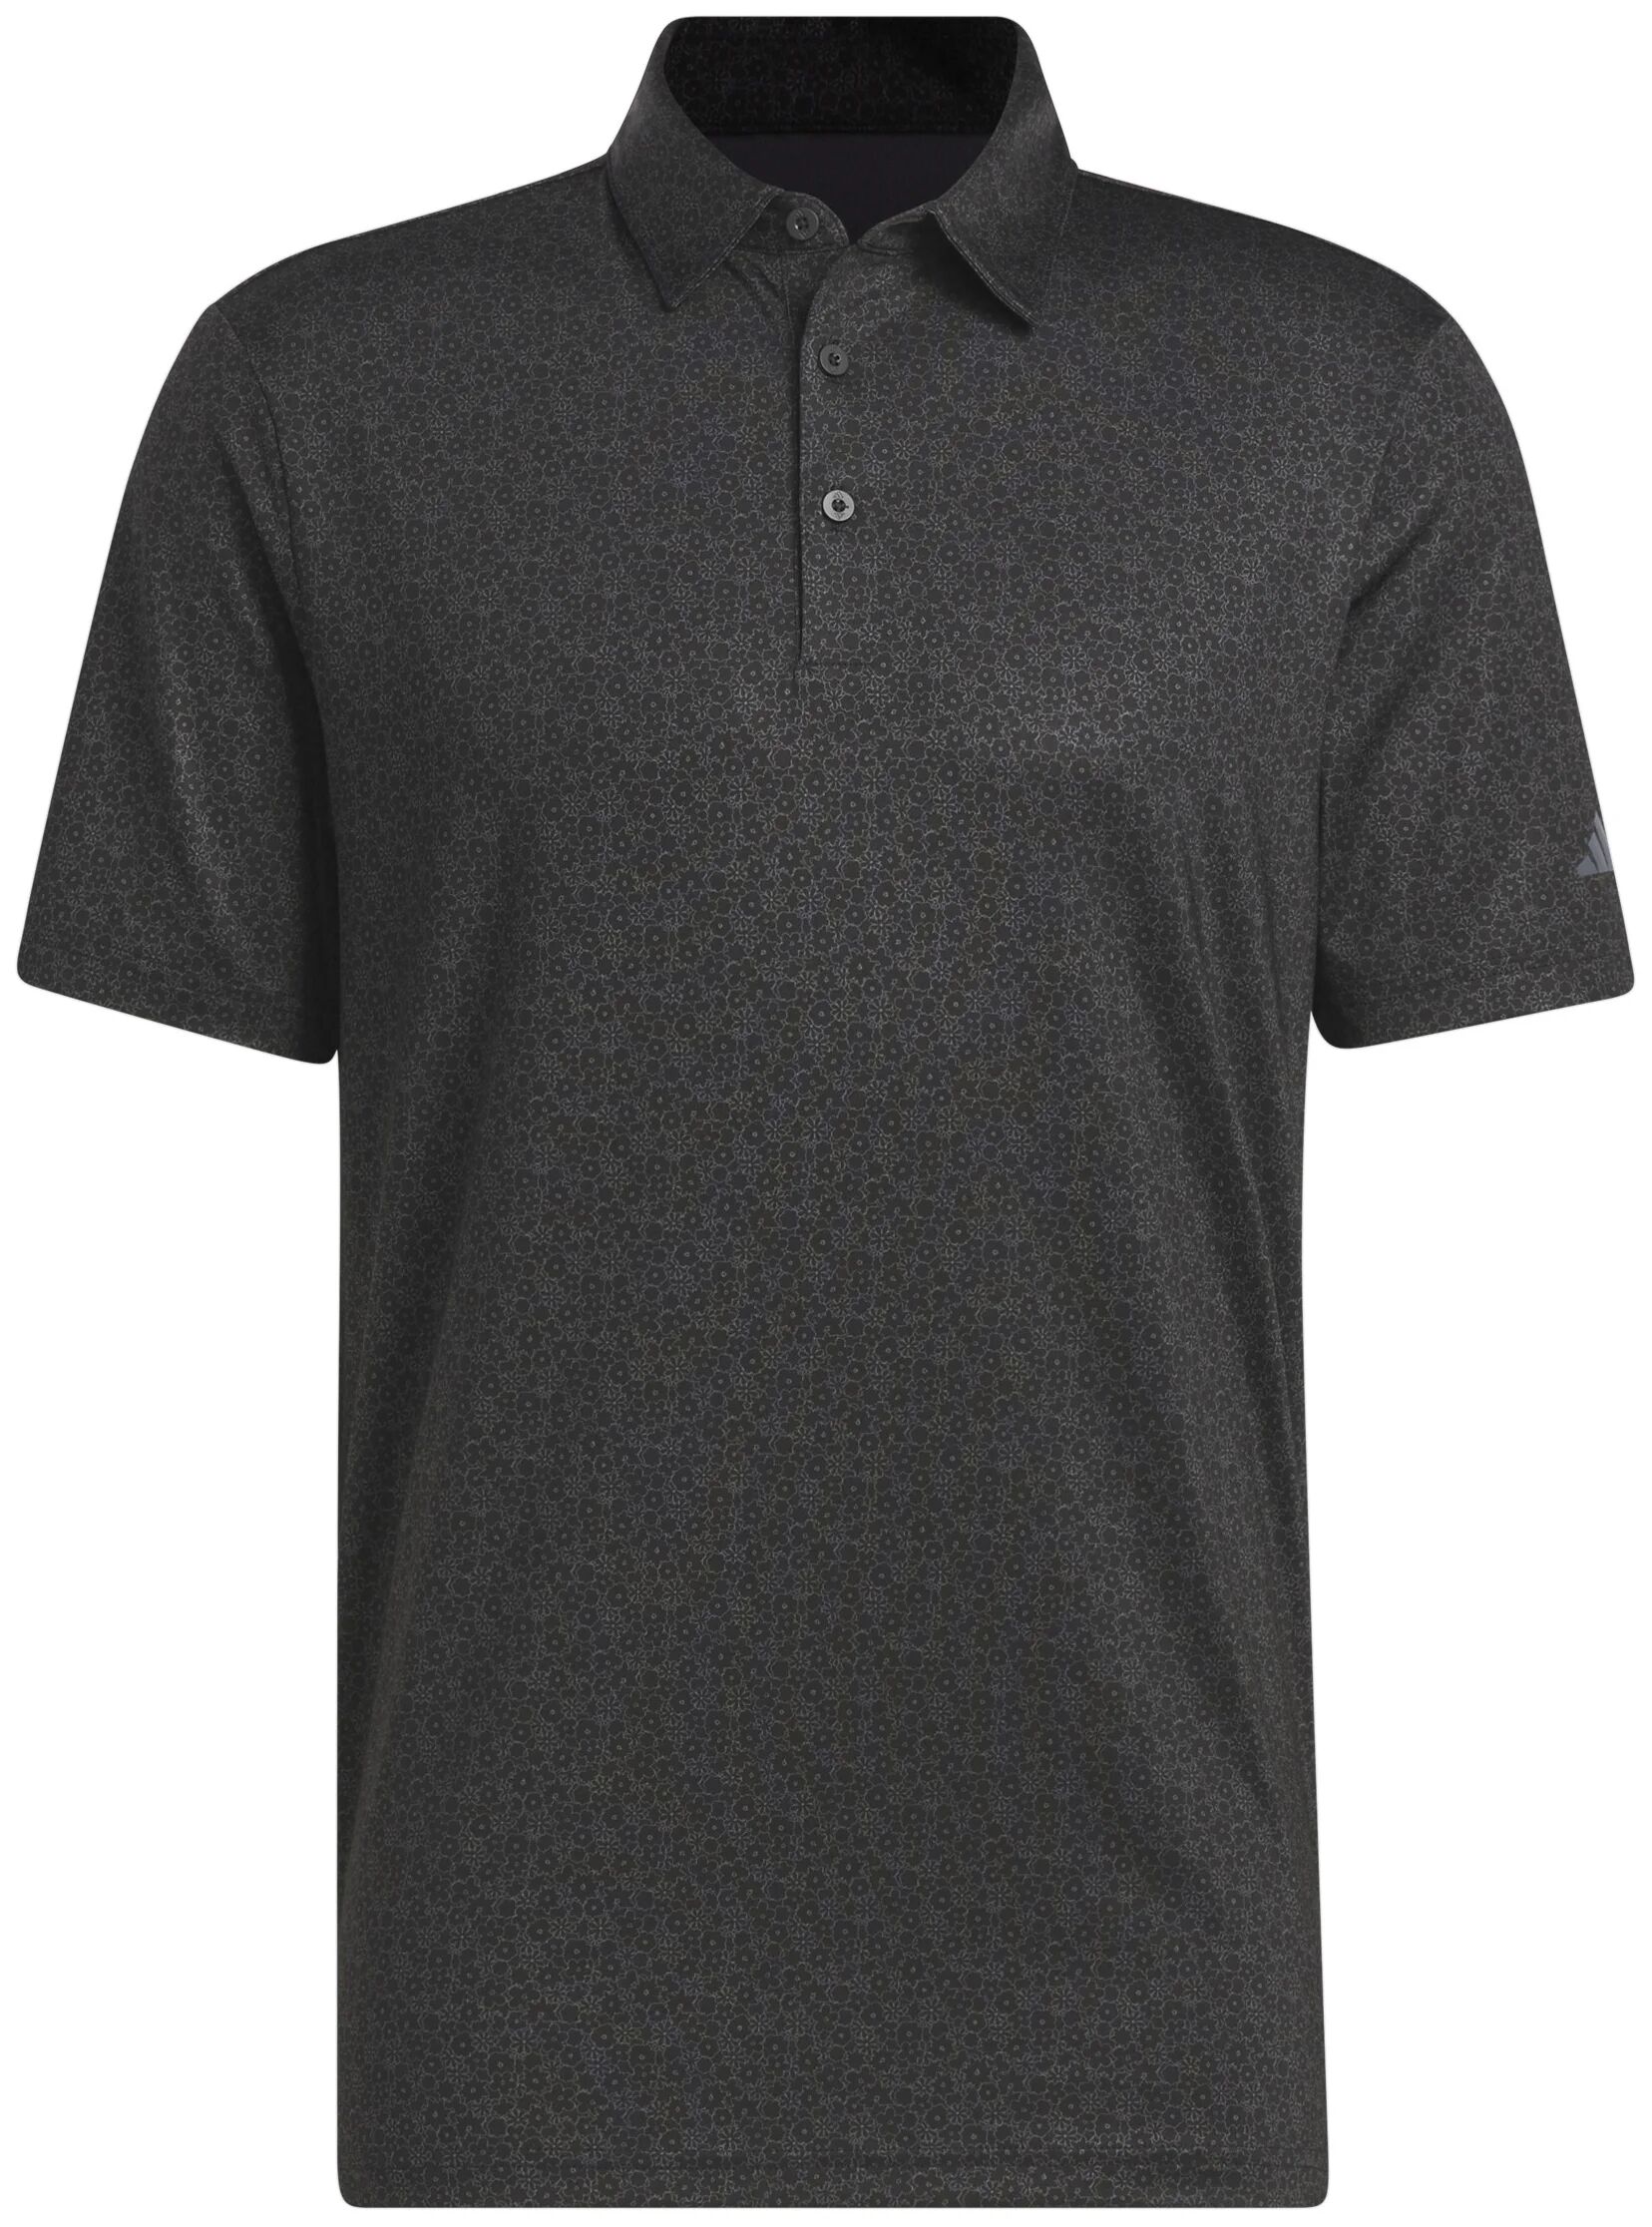 adidas Ultimate 365 Allover Print Men's Golf Polo Shirt - Black, Size: Large